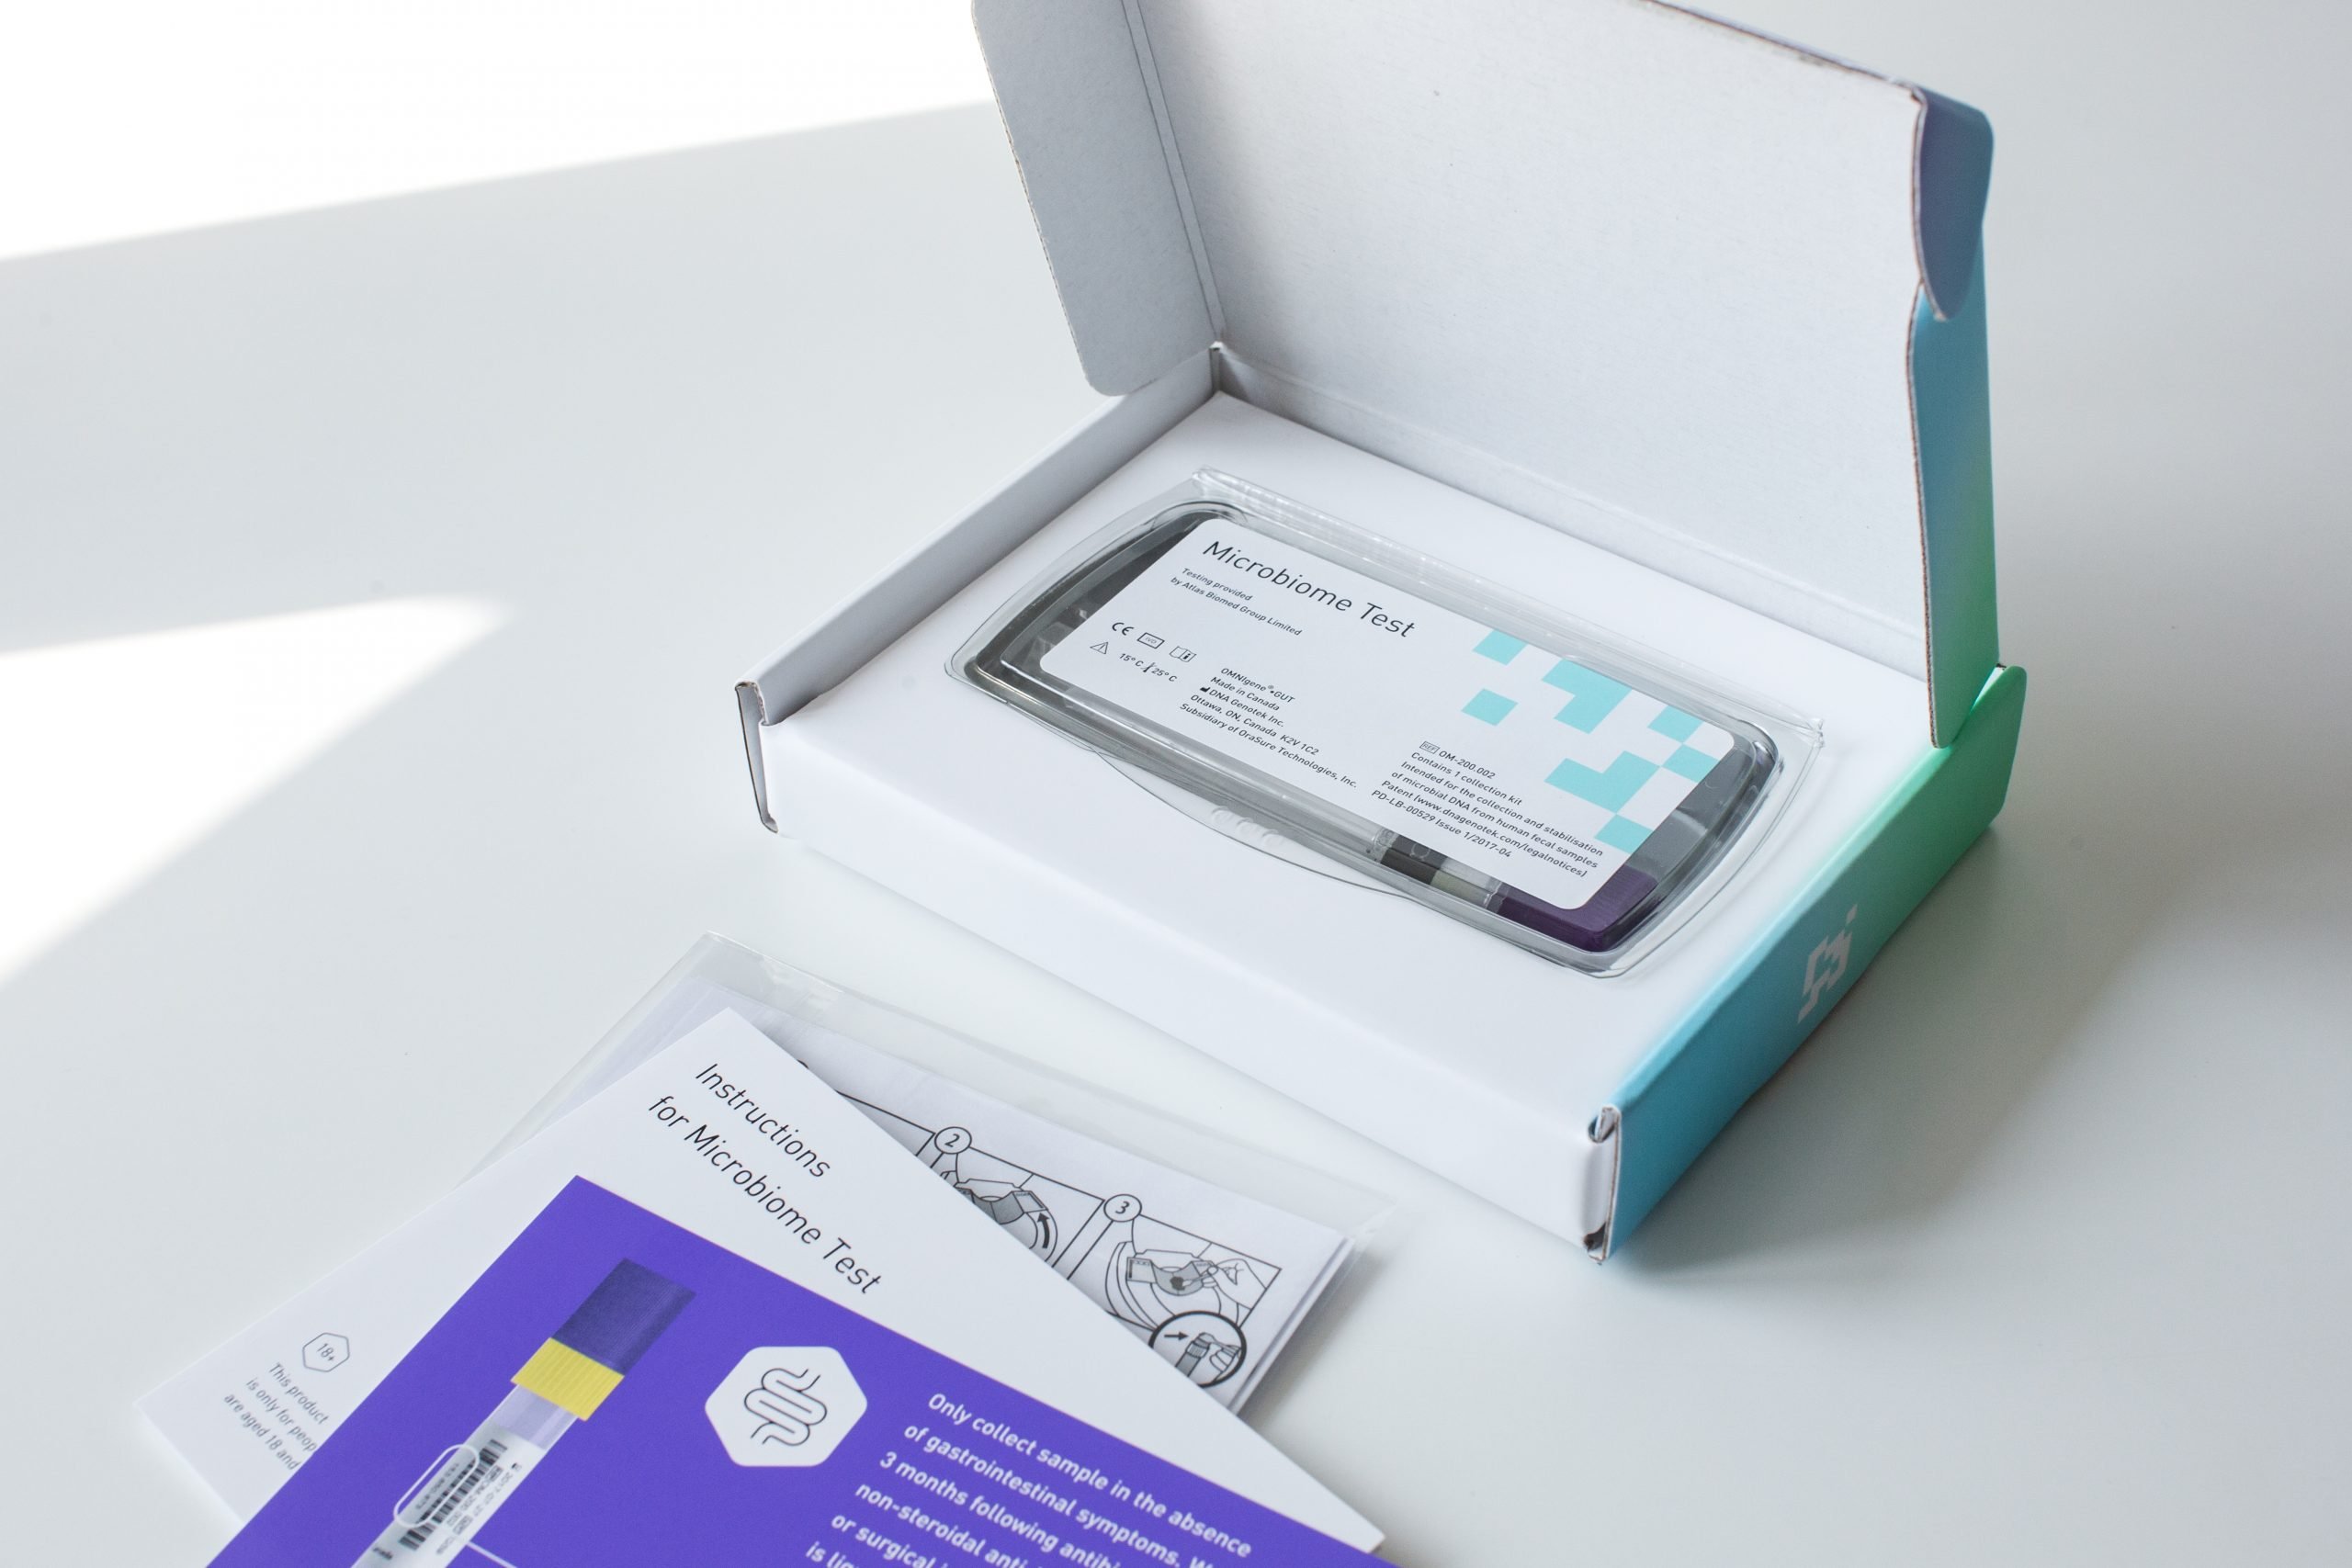 We Review Atlas Biomed Home Microbiome Test Kit 1